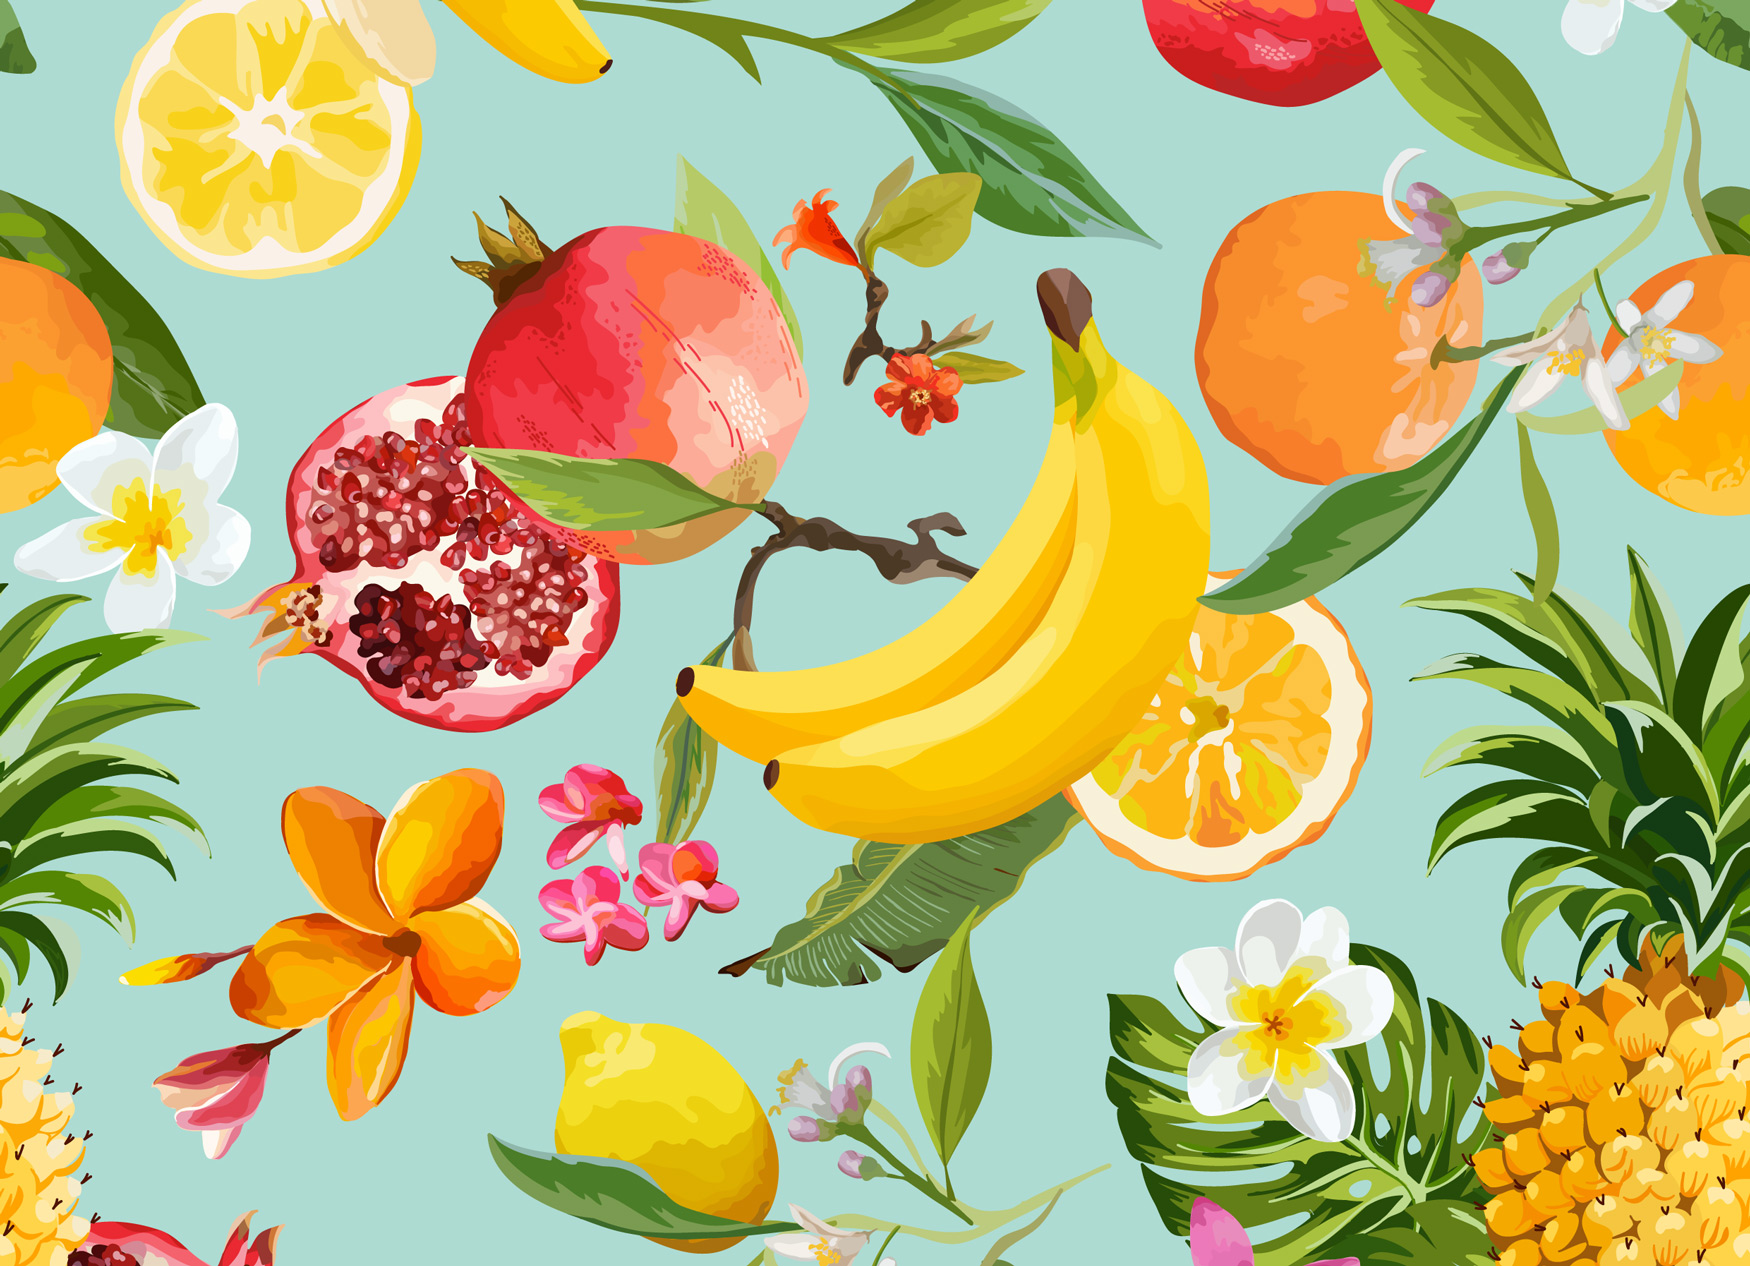 Seamless Tropical Fruits Pattern. Exotic Background with Pomegranate, Lemon, Flowers and Palm Leaves for Wallpaper, Wrapping Paper, Fabric. Vector illustration